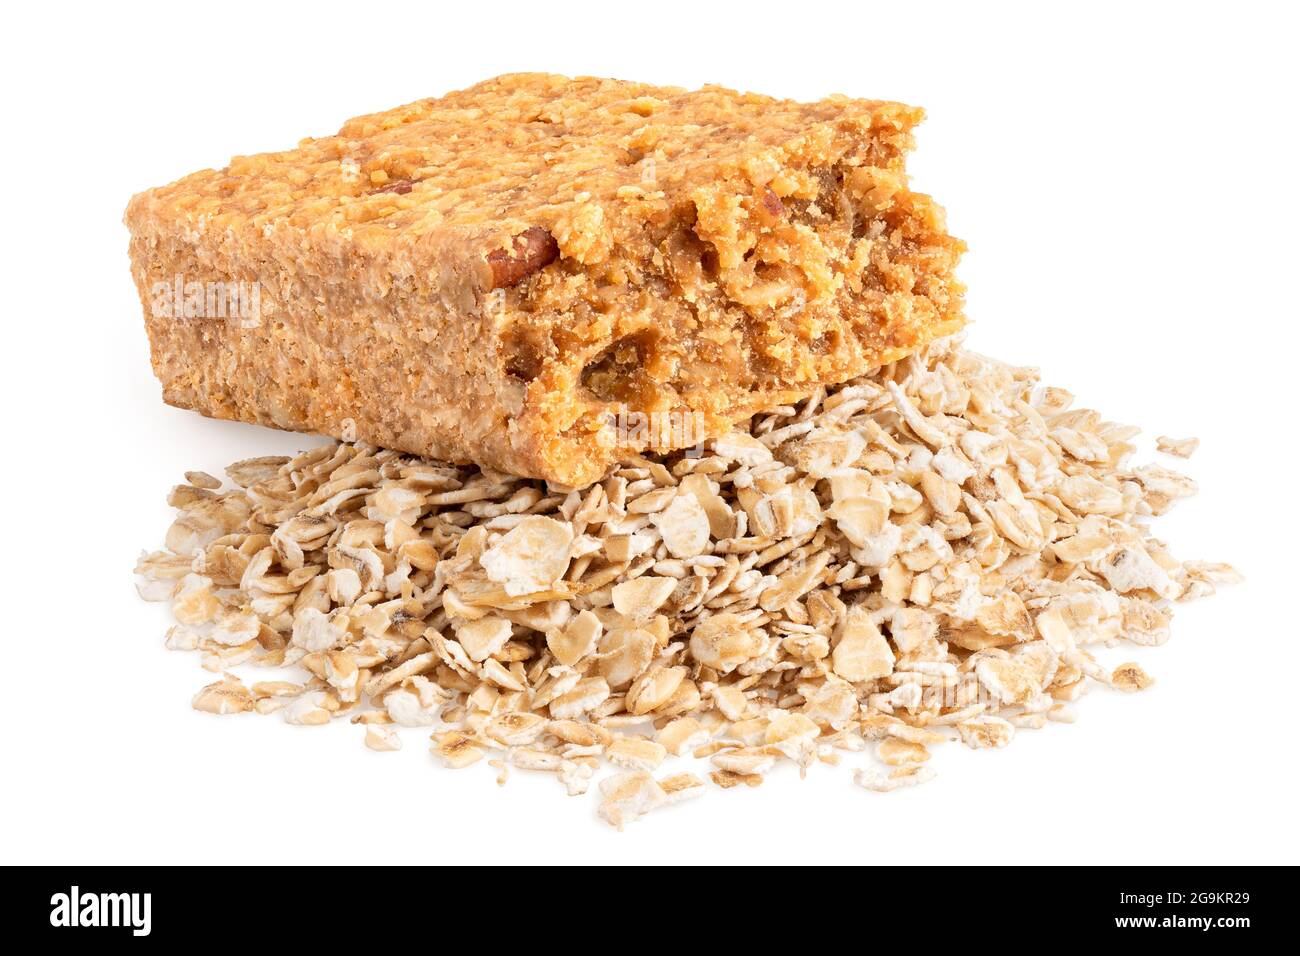 Partially eaten oat flapjack with nuts on a pile of oats isolated on white. Stock Photo